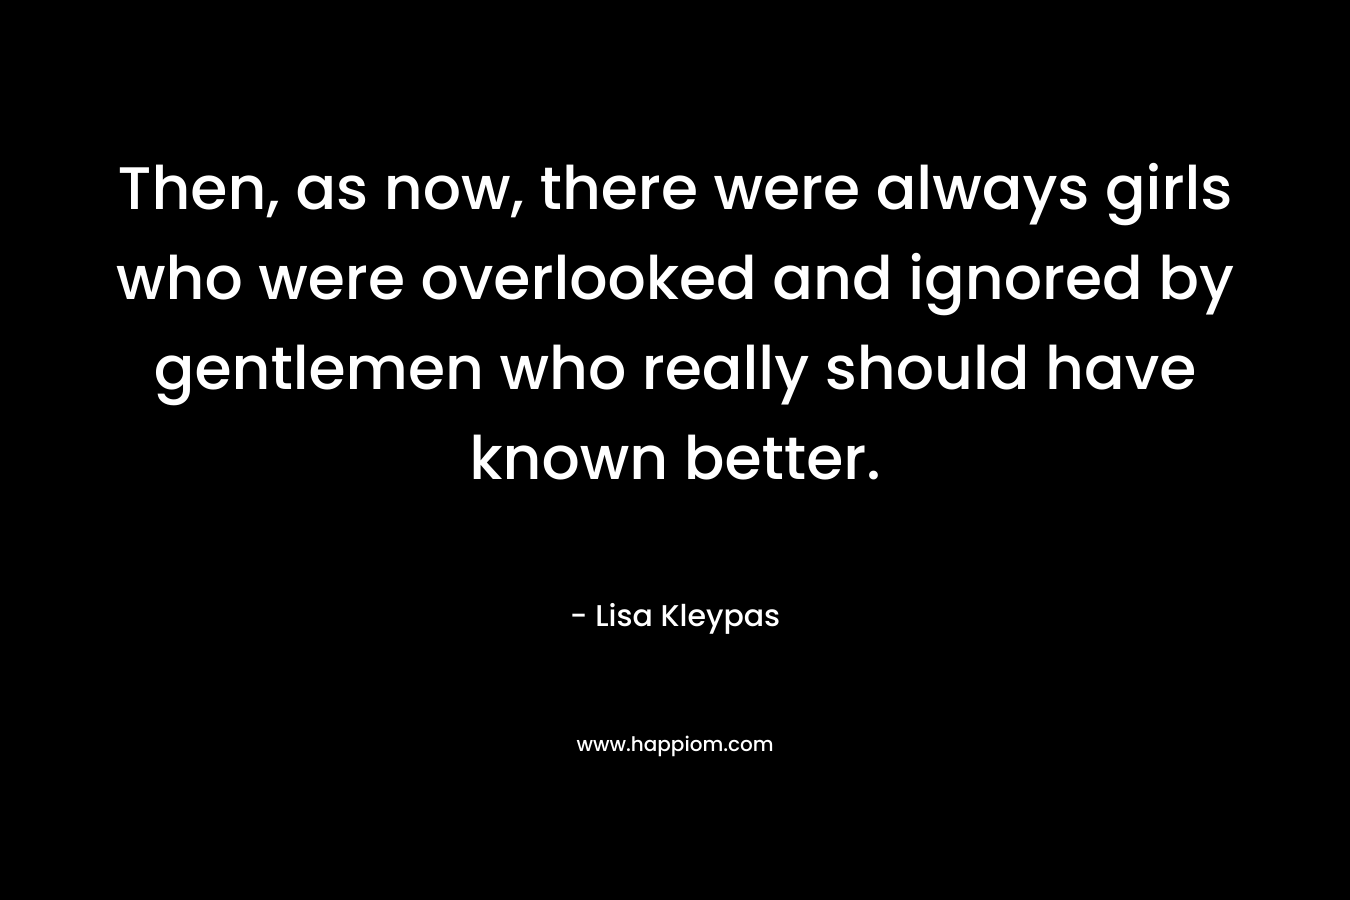 Then, as now, there were always girls who were overlooked and ignored by gentlemen who really should have known better. – Lisa Kleypas